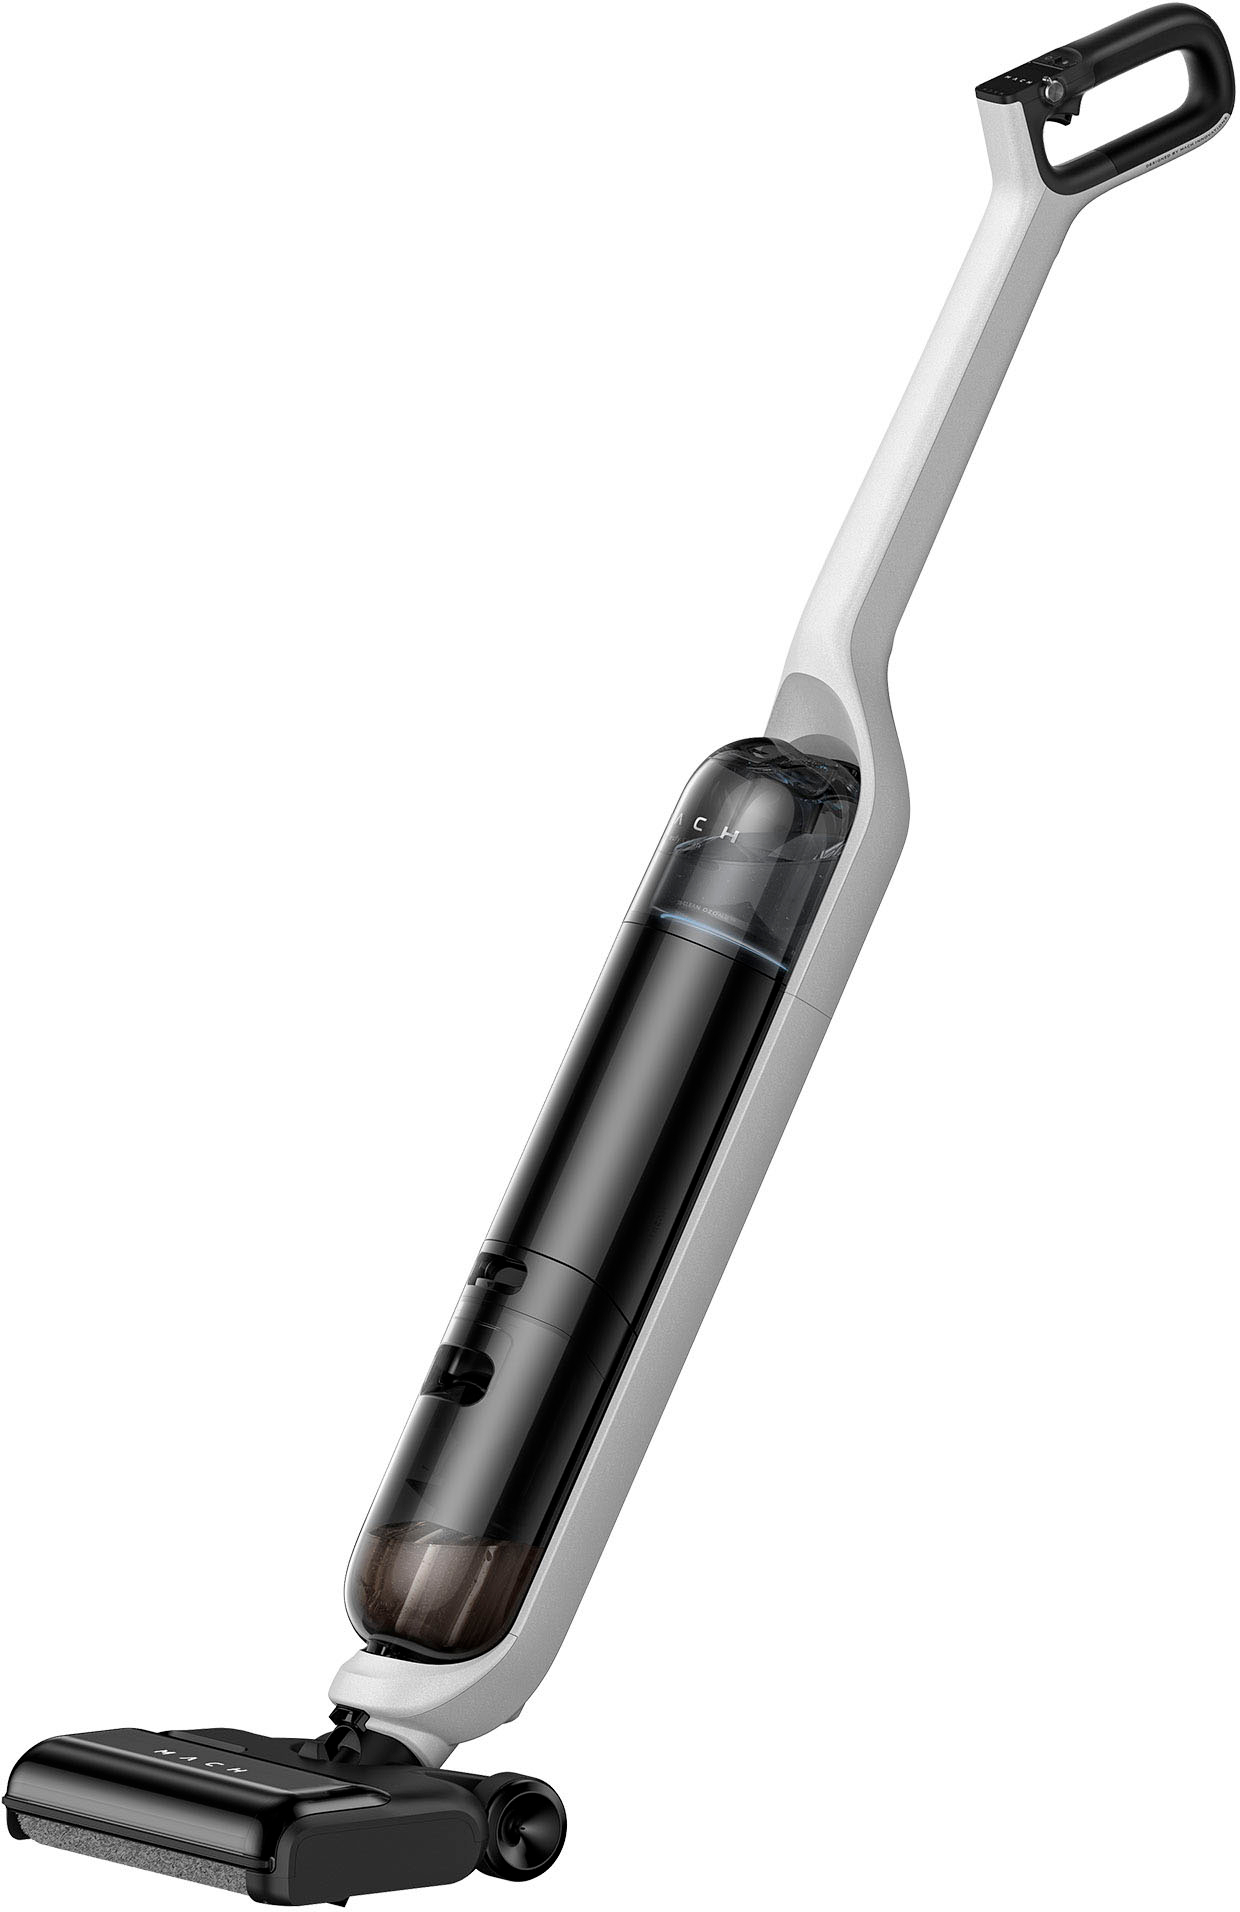 Left View: eufy Clean - MACH V1 All-in-One Cordless Upright Vacuum with Always-Clean Mop - Black